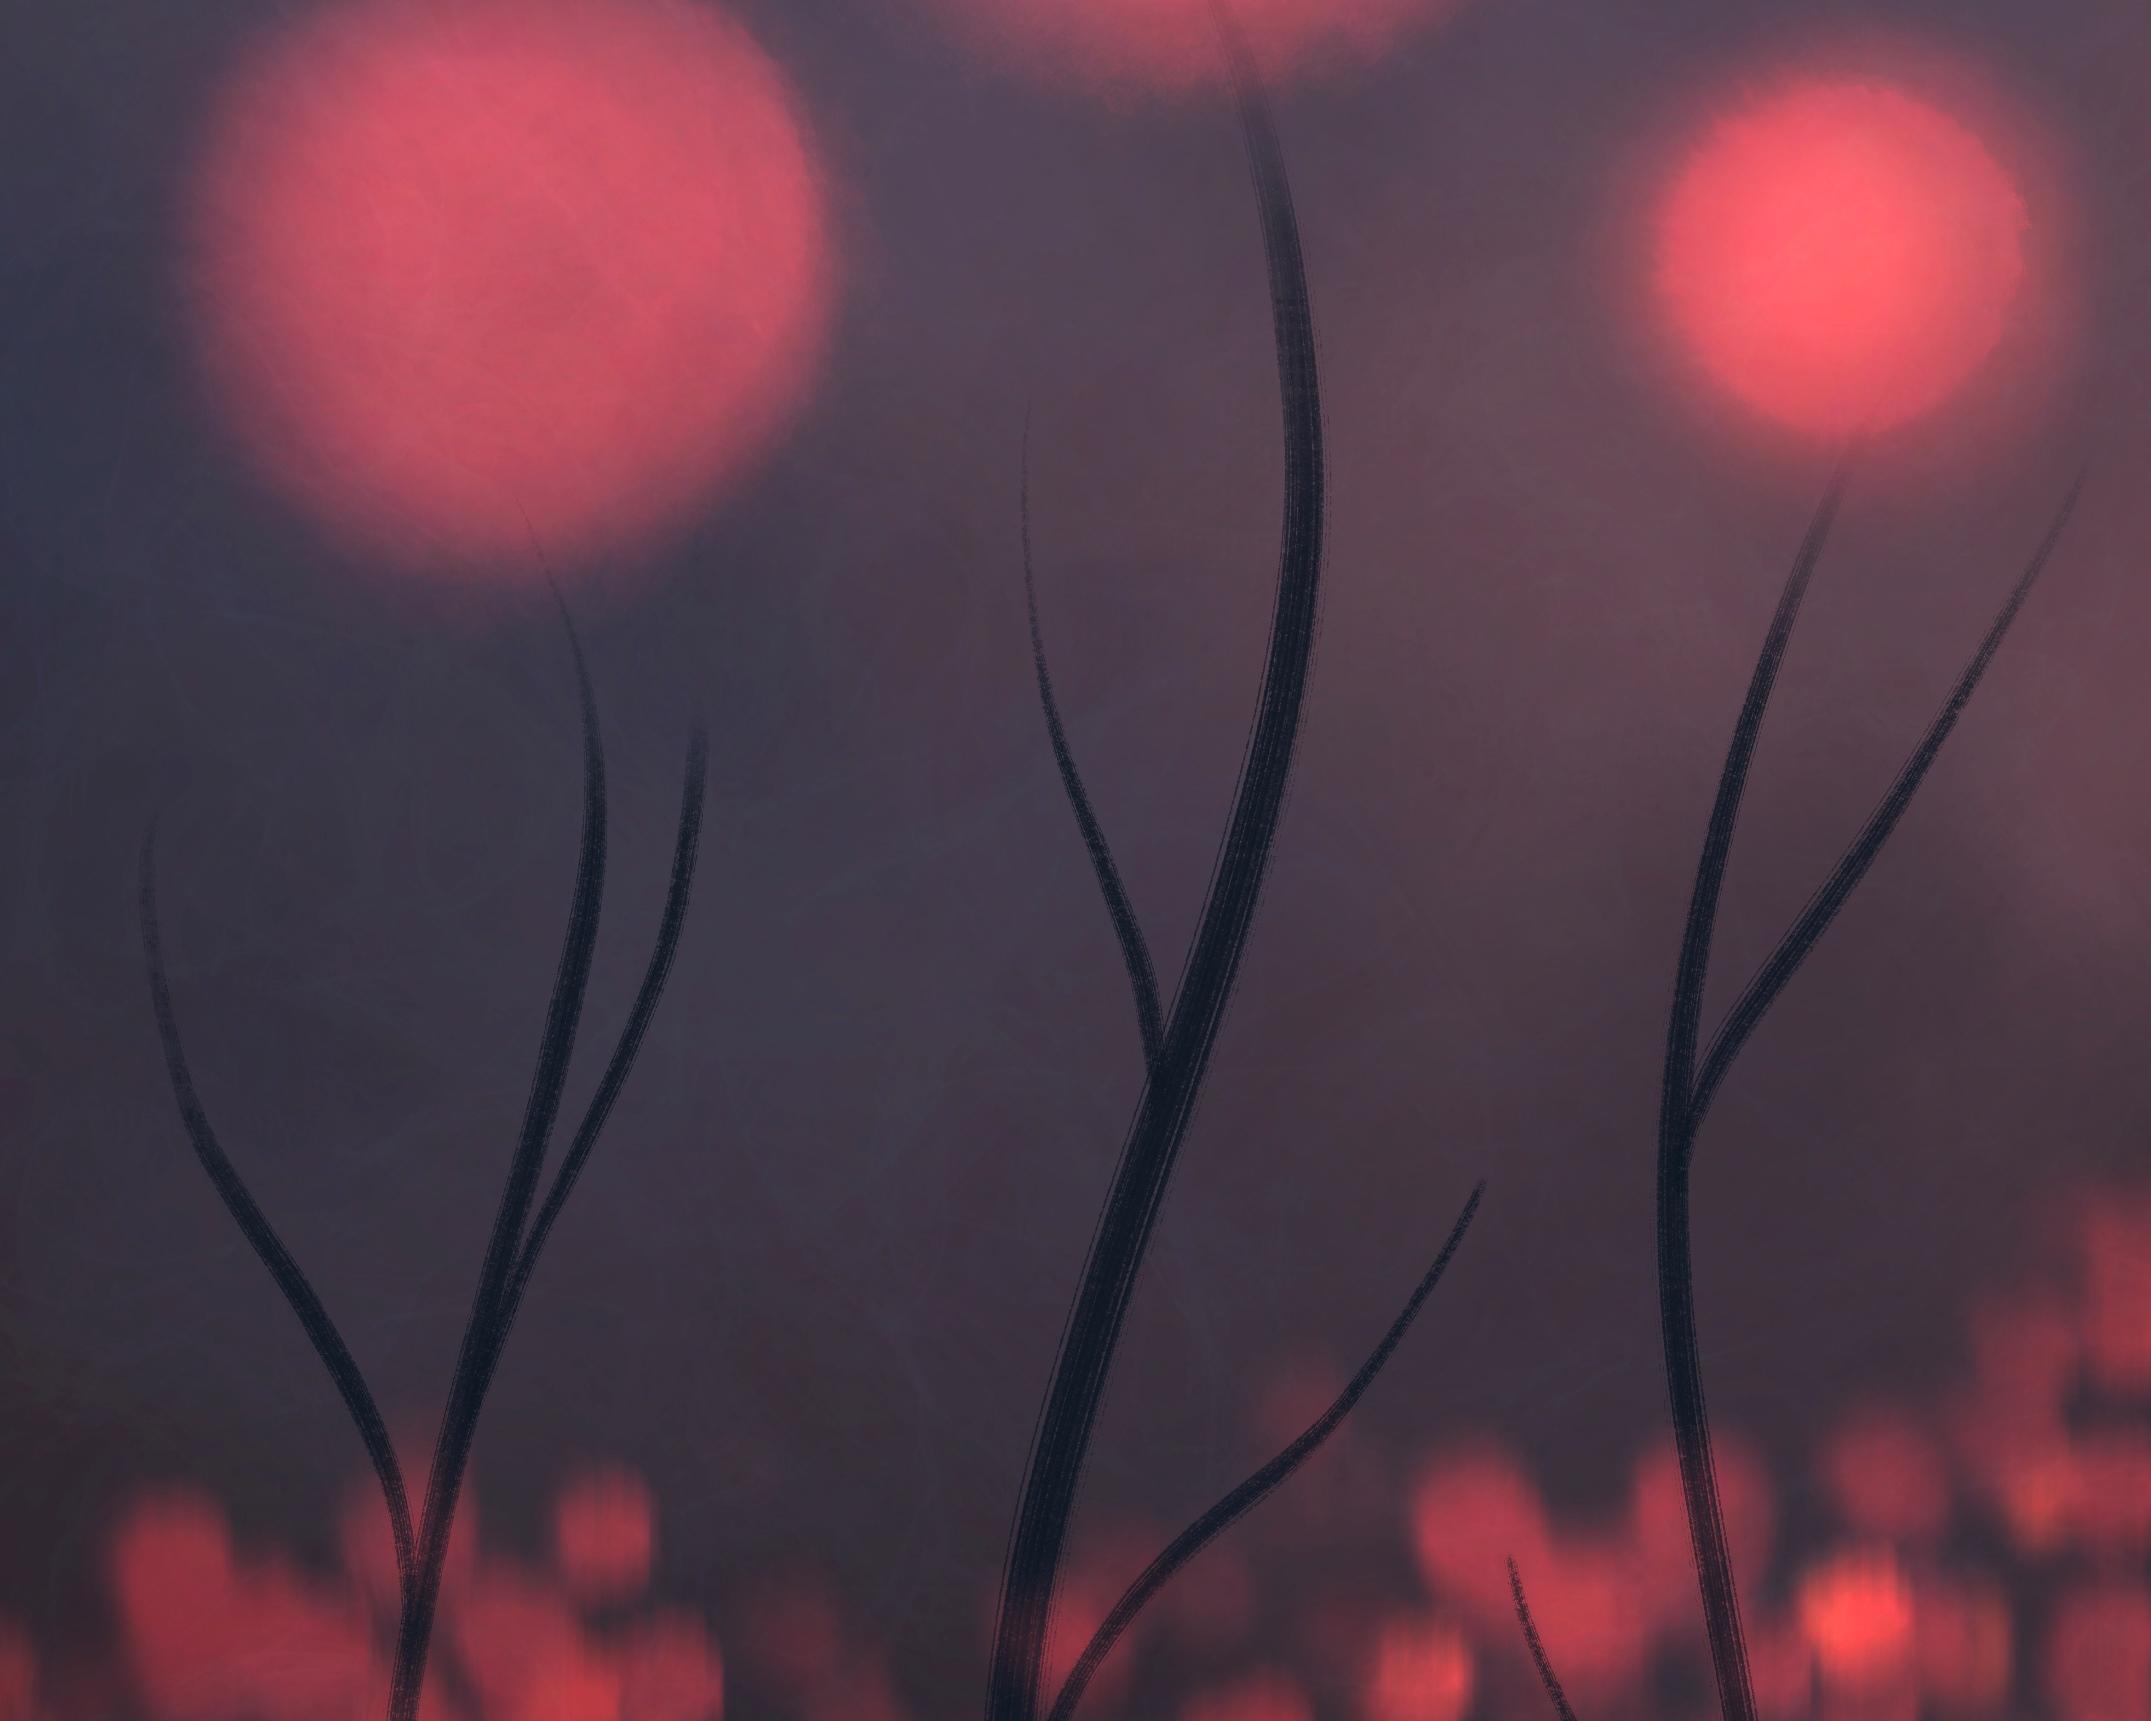 Close up of an abstract digital painting by Lily Bourne titled Ember Flowers. A red themed artwork with red ball flowers shown at dusk.